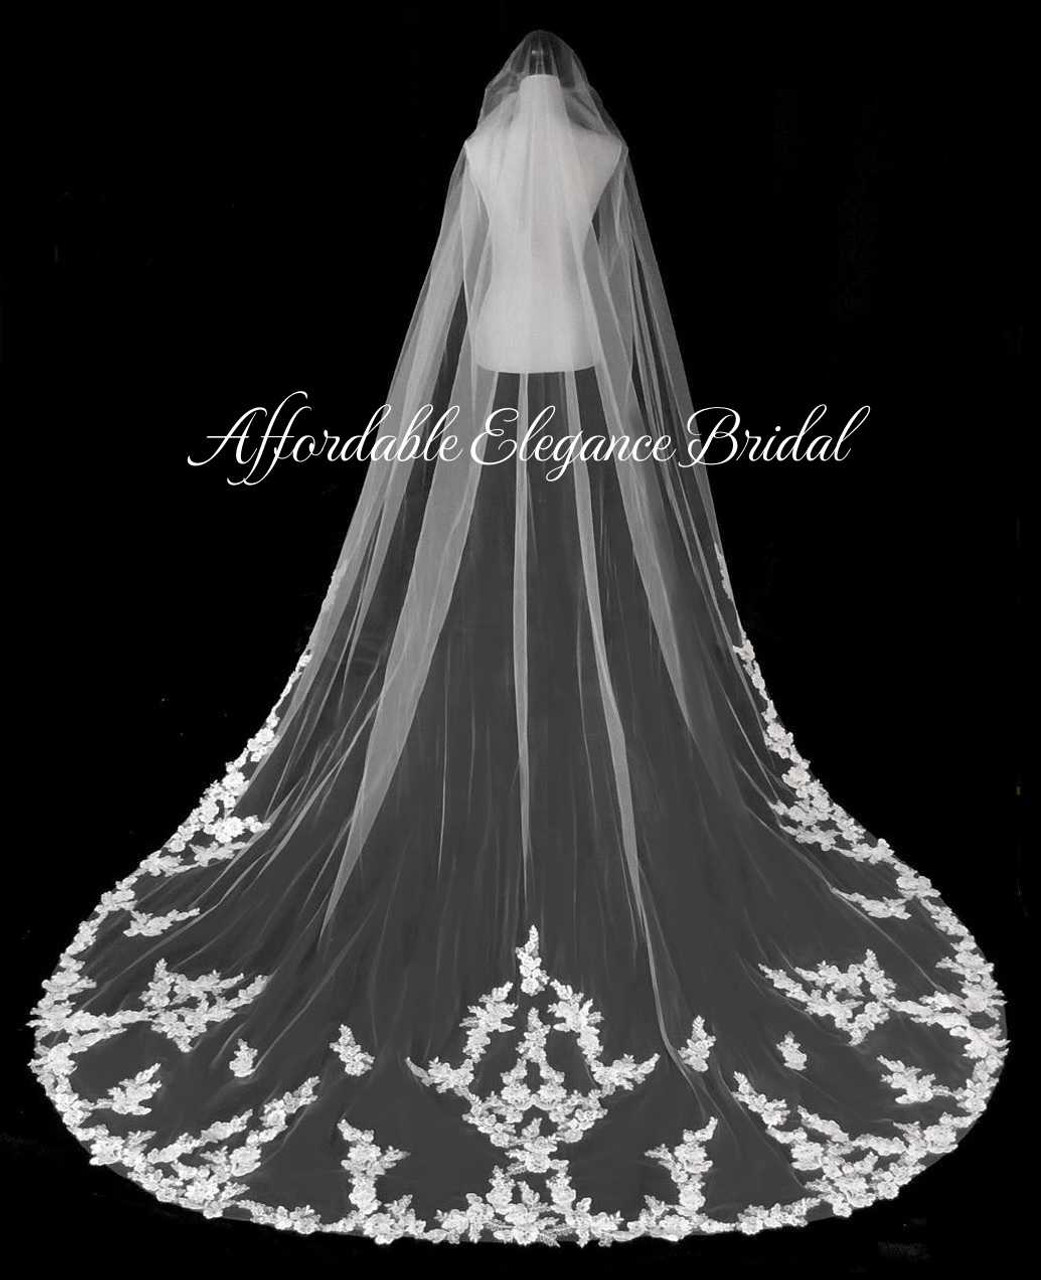 https://cdn11.bigcommerce.com/s-zb3qt33o/images/stencil/1280x1280/products/18847/65166/Royal-Cathedral-Wedding-Veil-with-Alencon-Lace-and-Rhinestones_61583__03372.1698200365.jpg?c=2